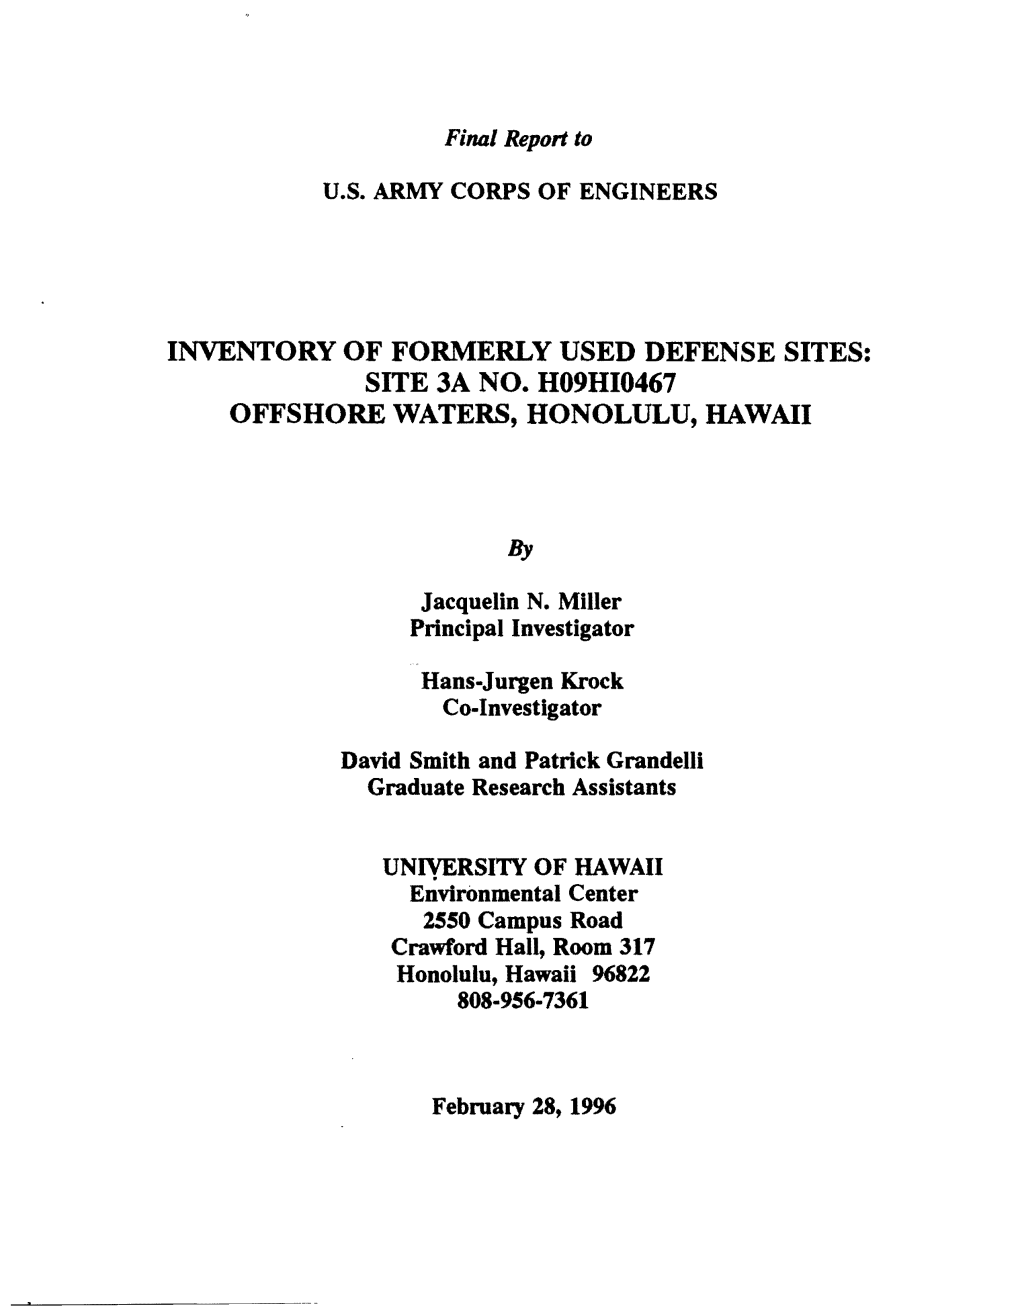 Inventory of Formerly Used Defense Sites: Site 3A No